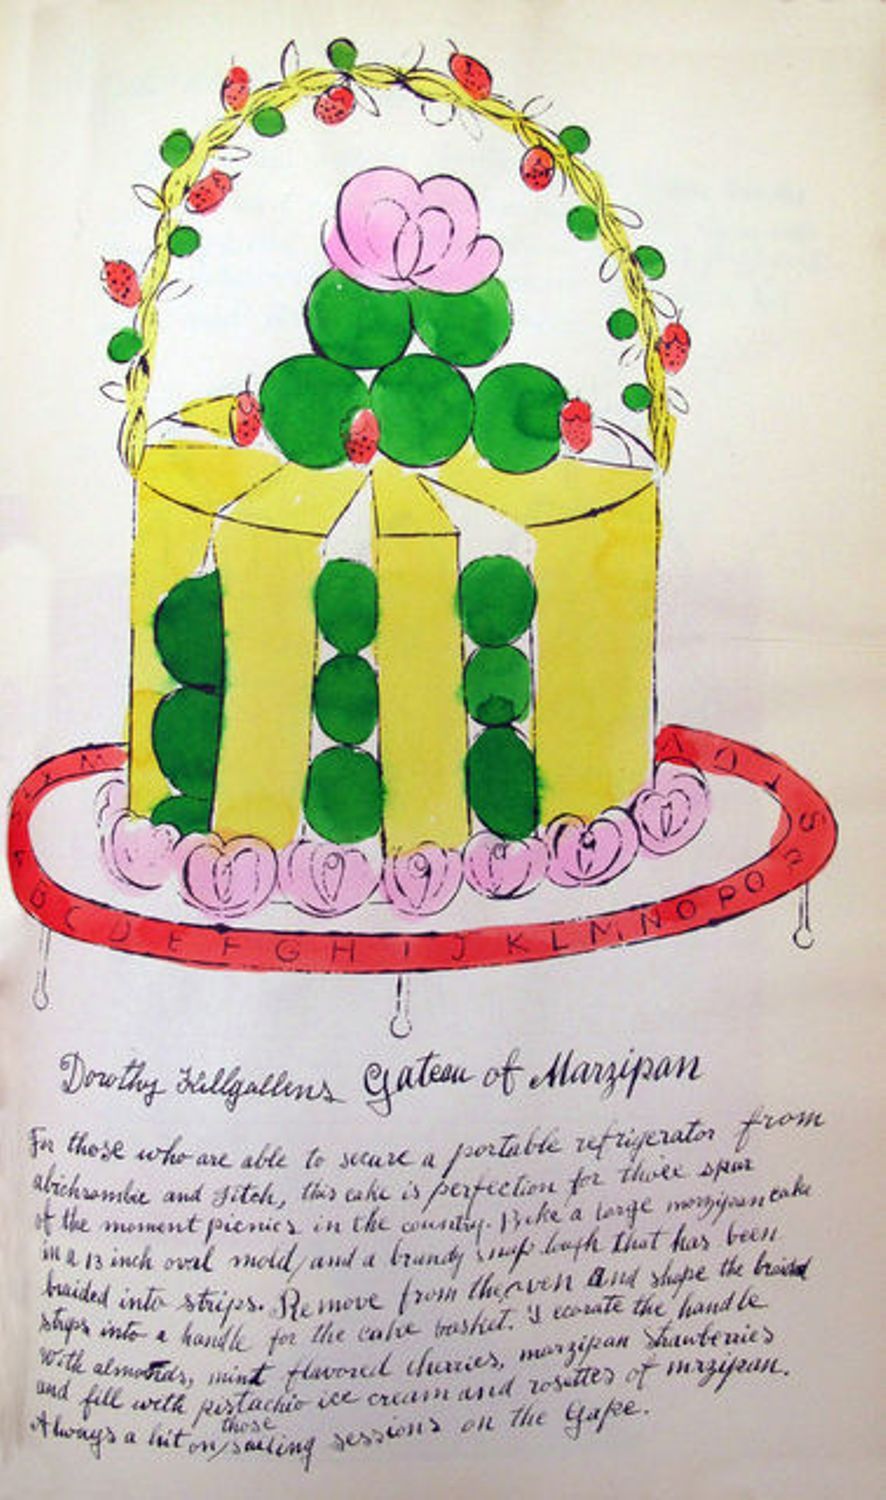 Dorothy Killgallen’s Gateau of Marzipan from Wild Raspberries series - Print by Andy Warhol